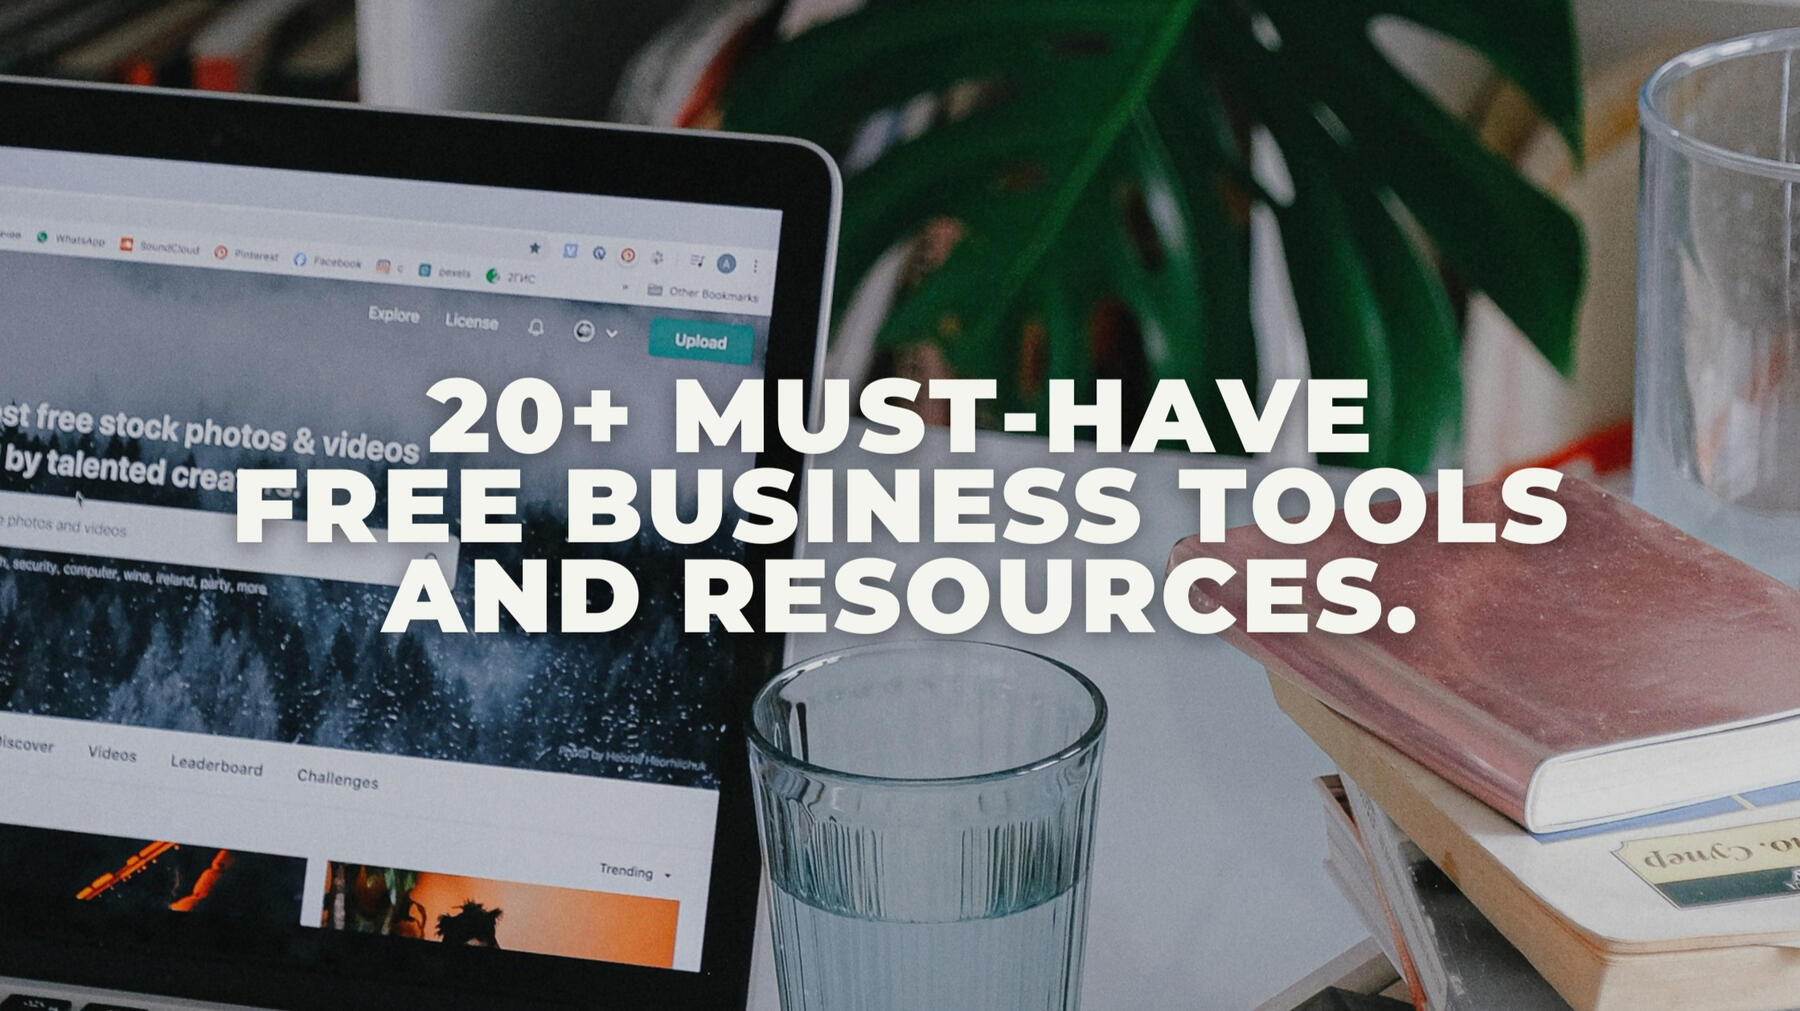 20+ Must-Have FREE Business Tools and Resources to Use in 2023